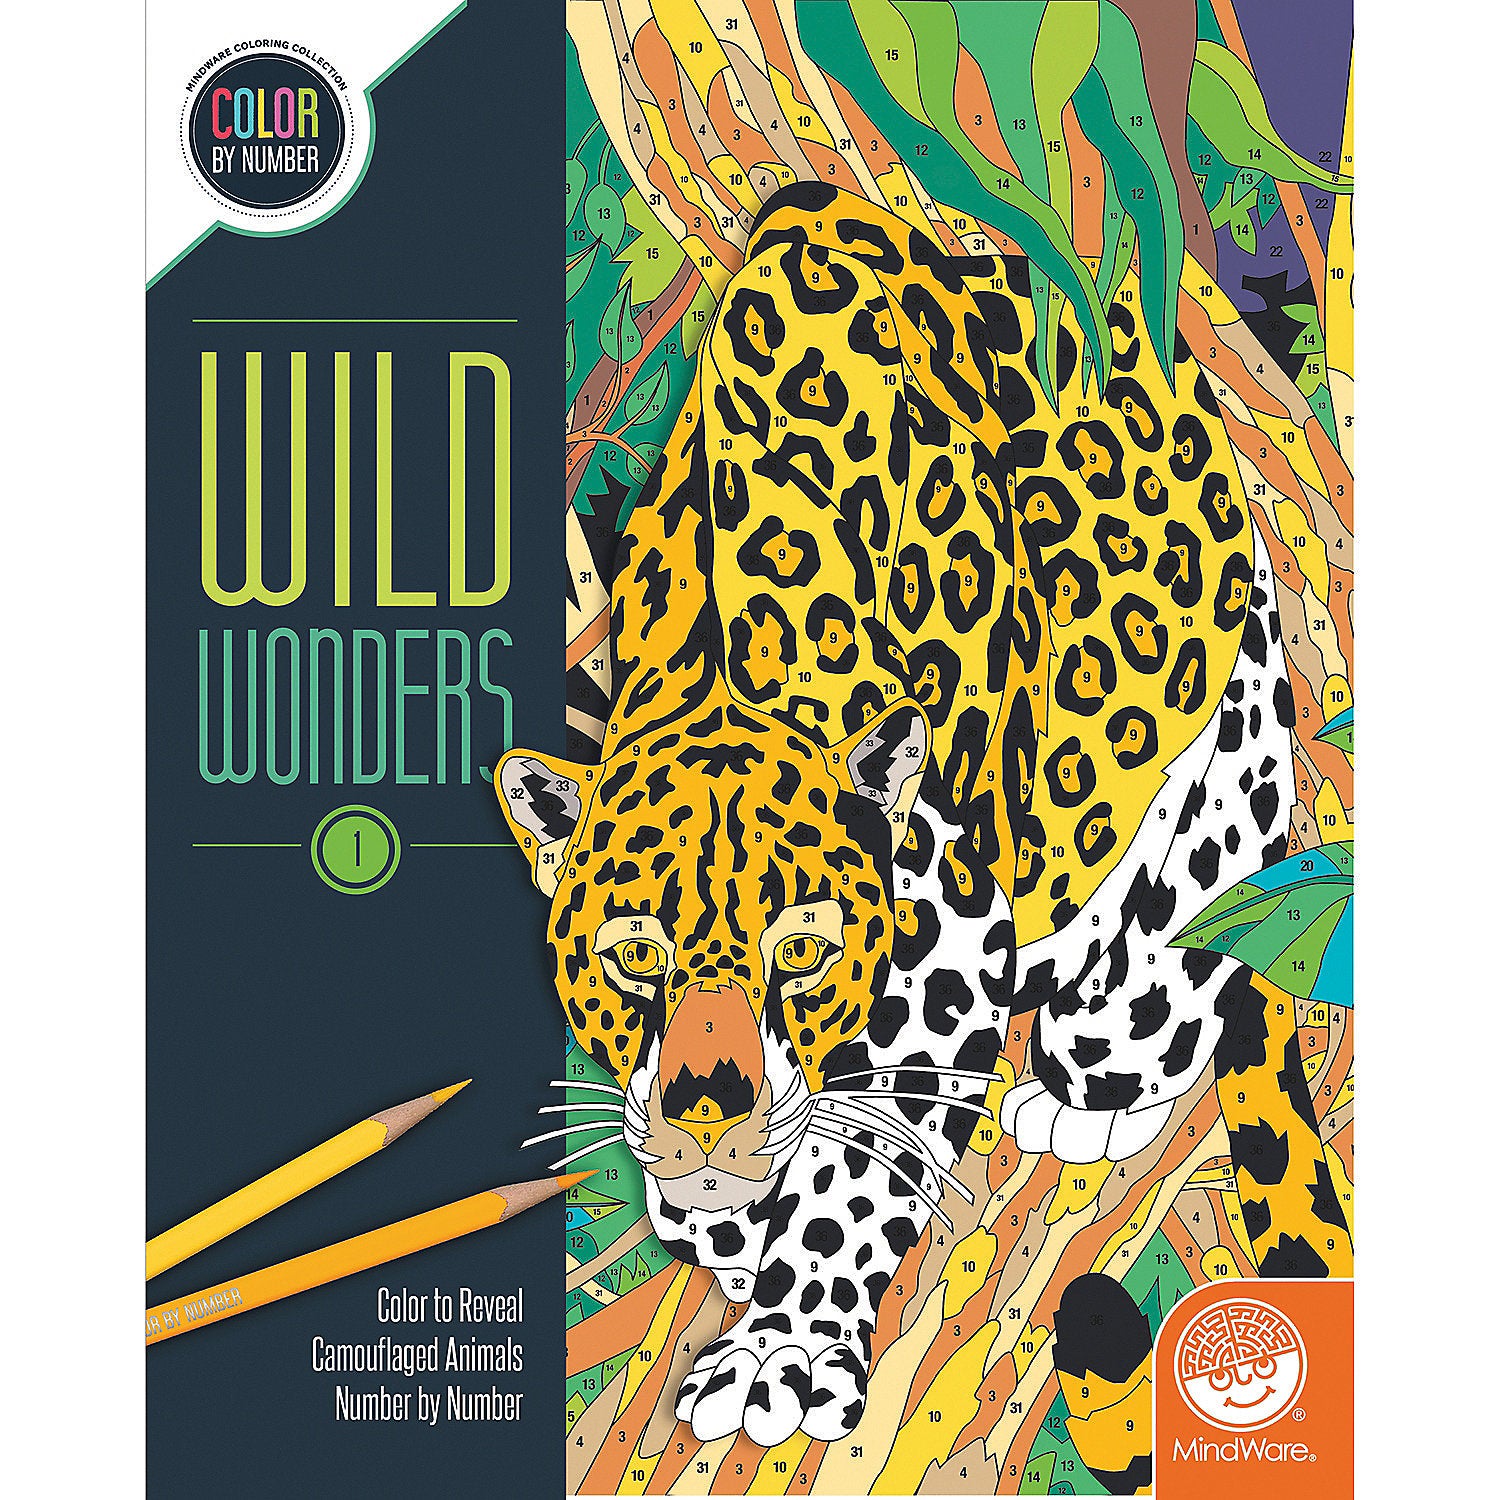 Wild Wonders Colouring Book #1